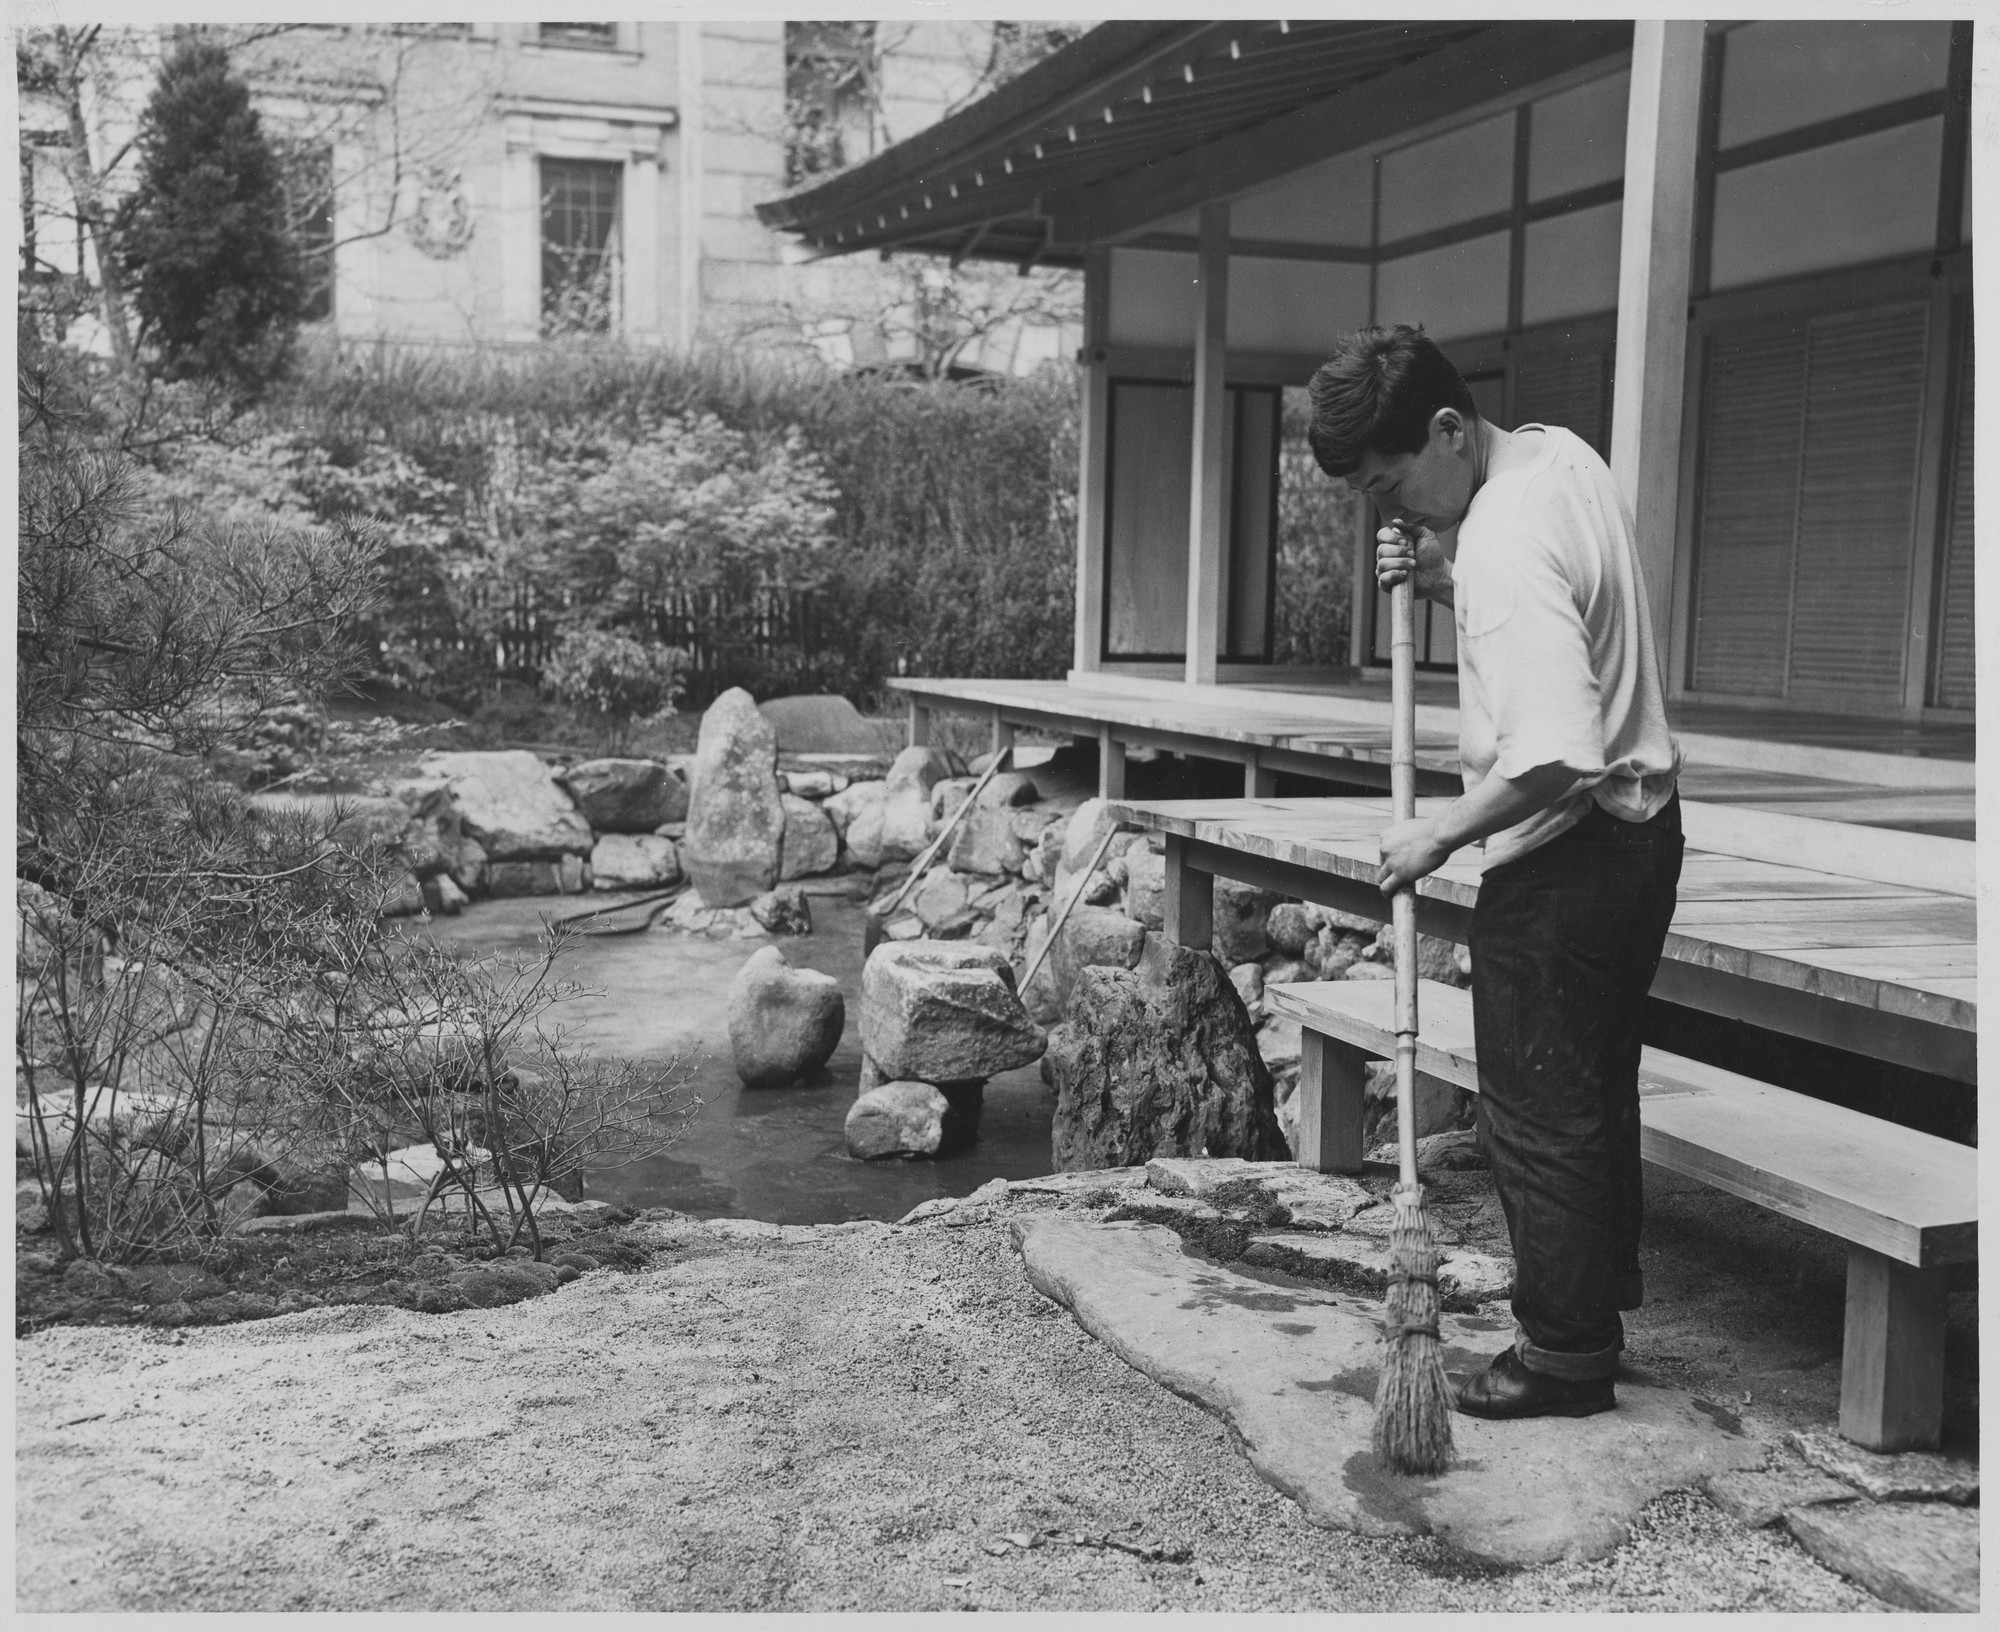 Reconditioning the Japanese House in the Museum of Modern Art garden. Robert Kobayashi sweeping the stones the garden of the house." Publicity photograph released in connection with the exhibition, "Japanese